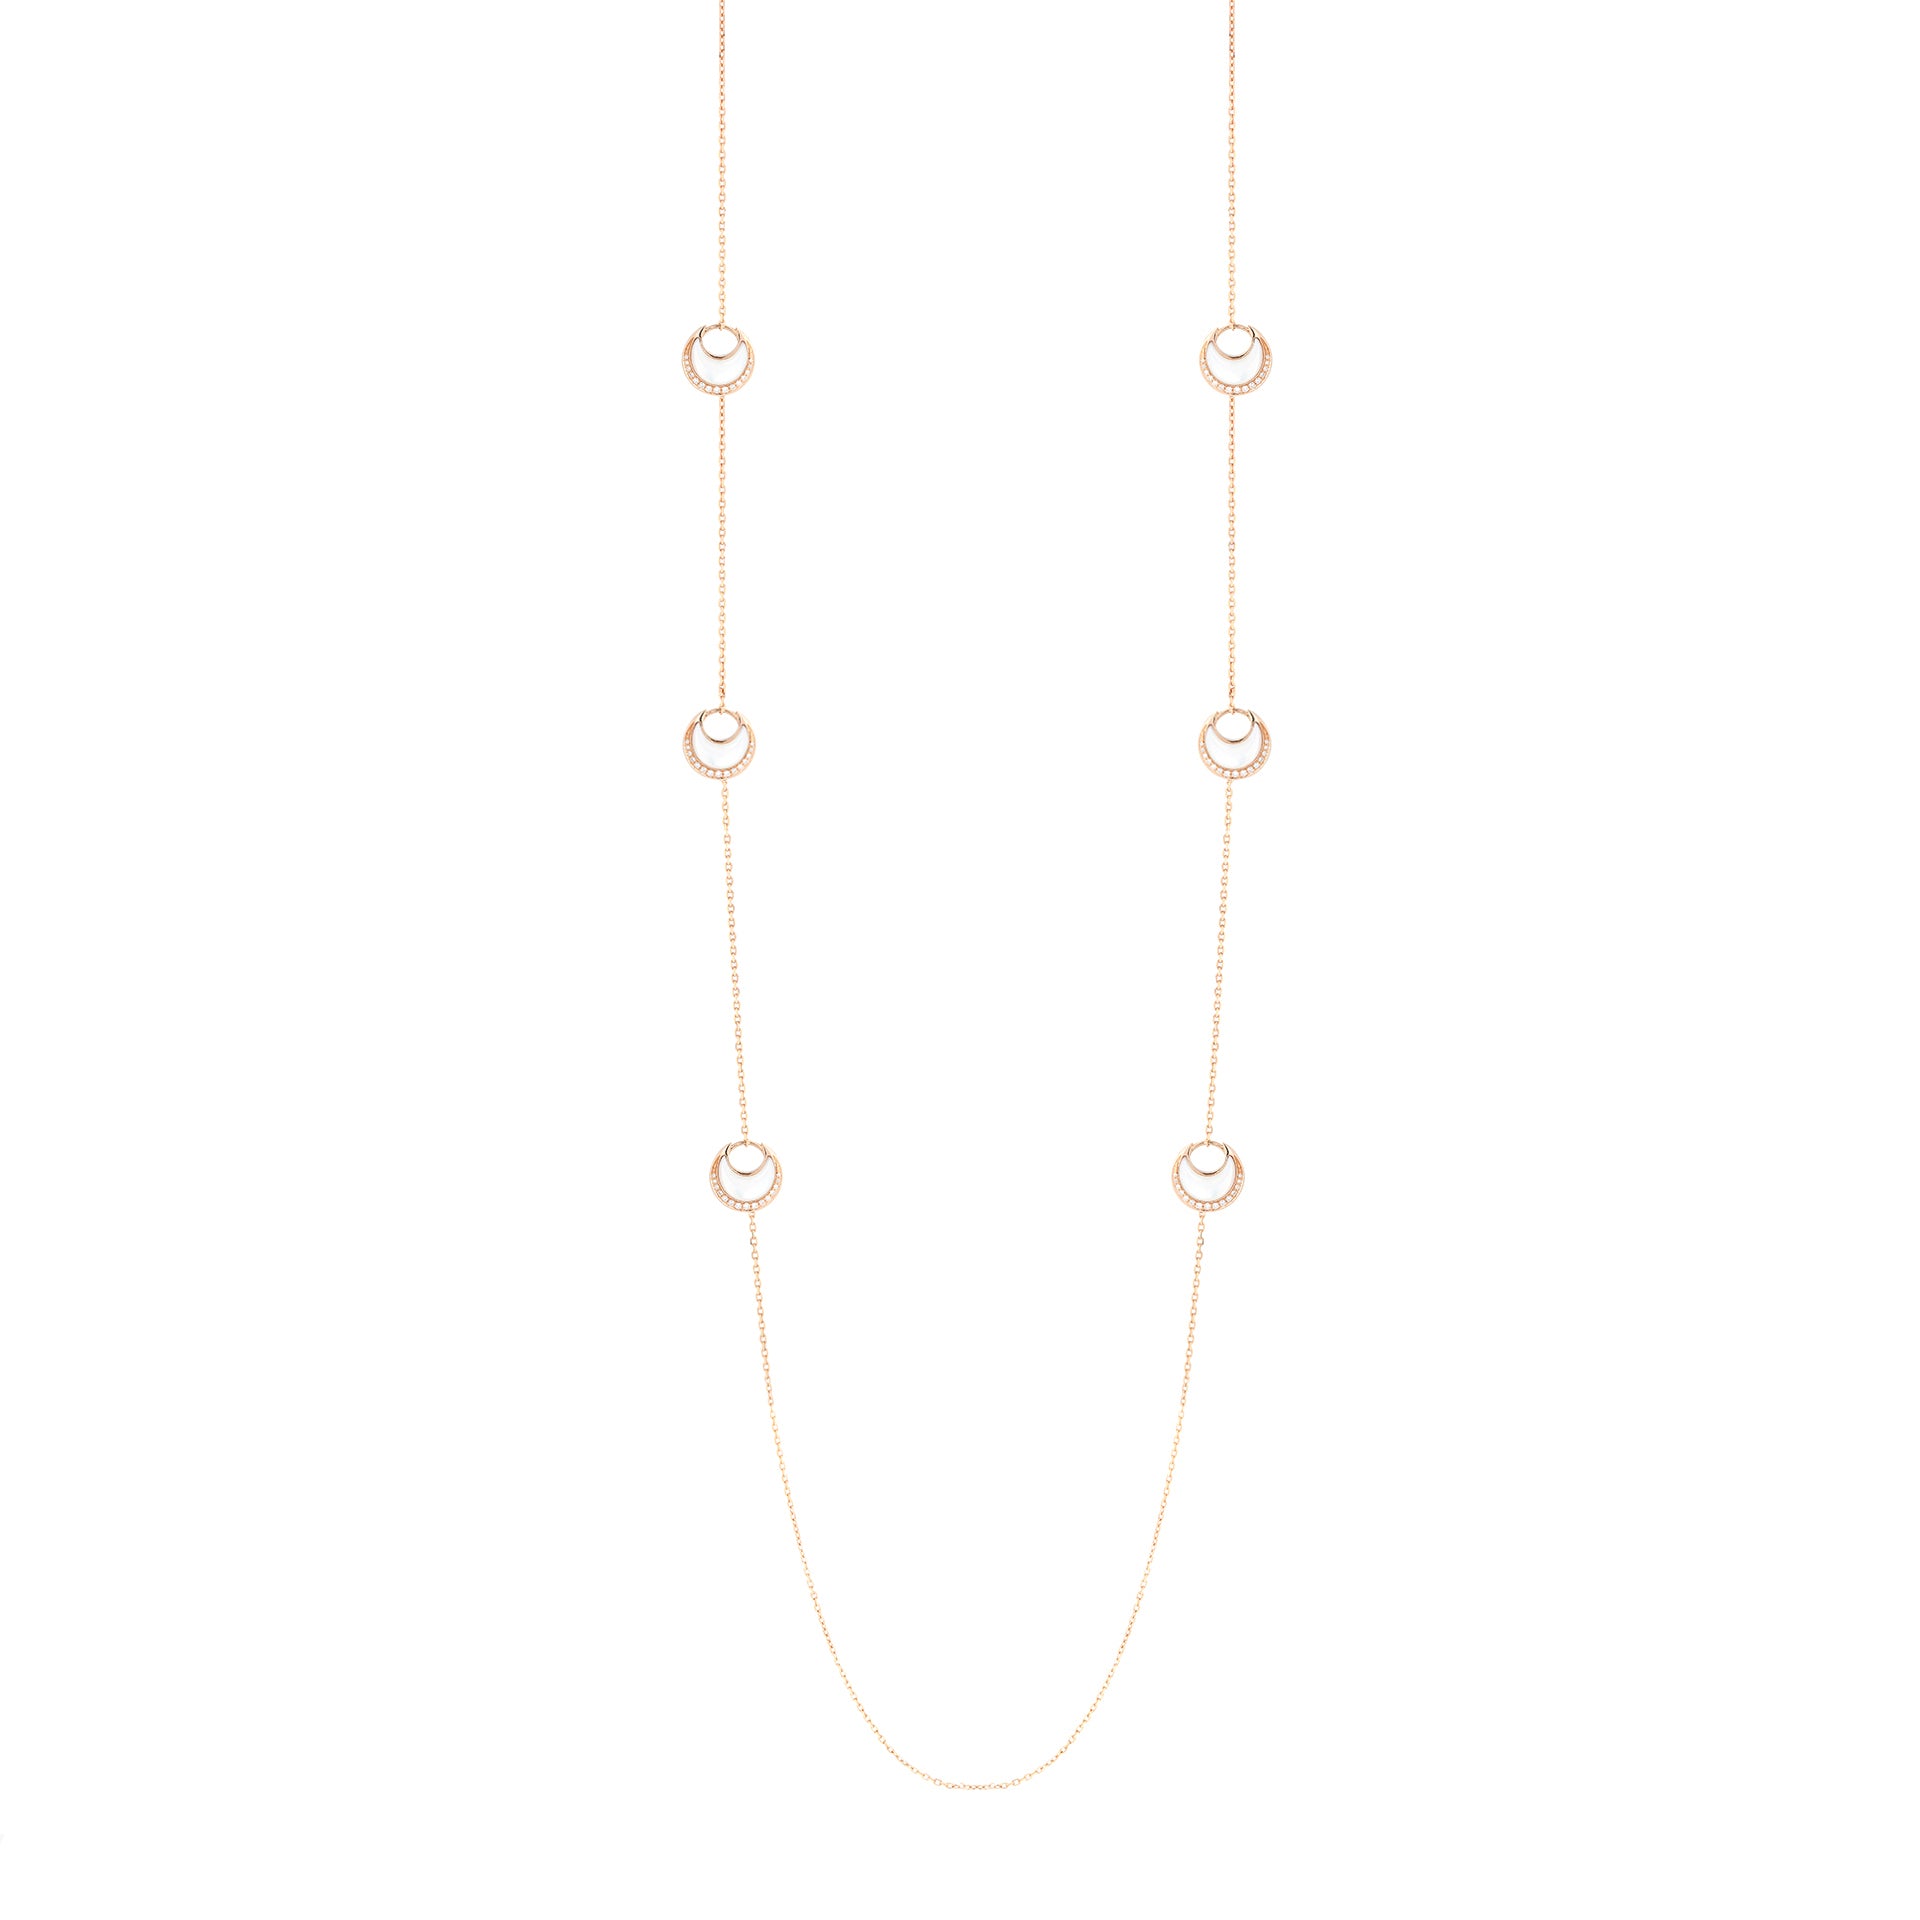 Al Hilal necklace in rose gold with mother of pearl stones and diamonds